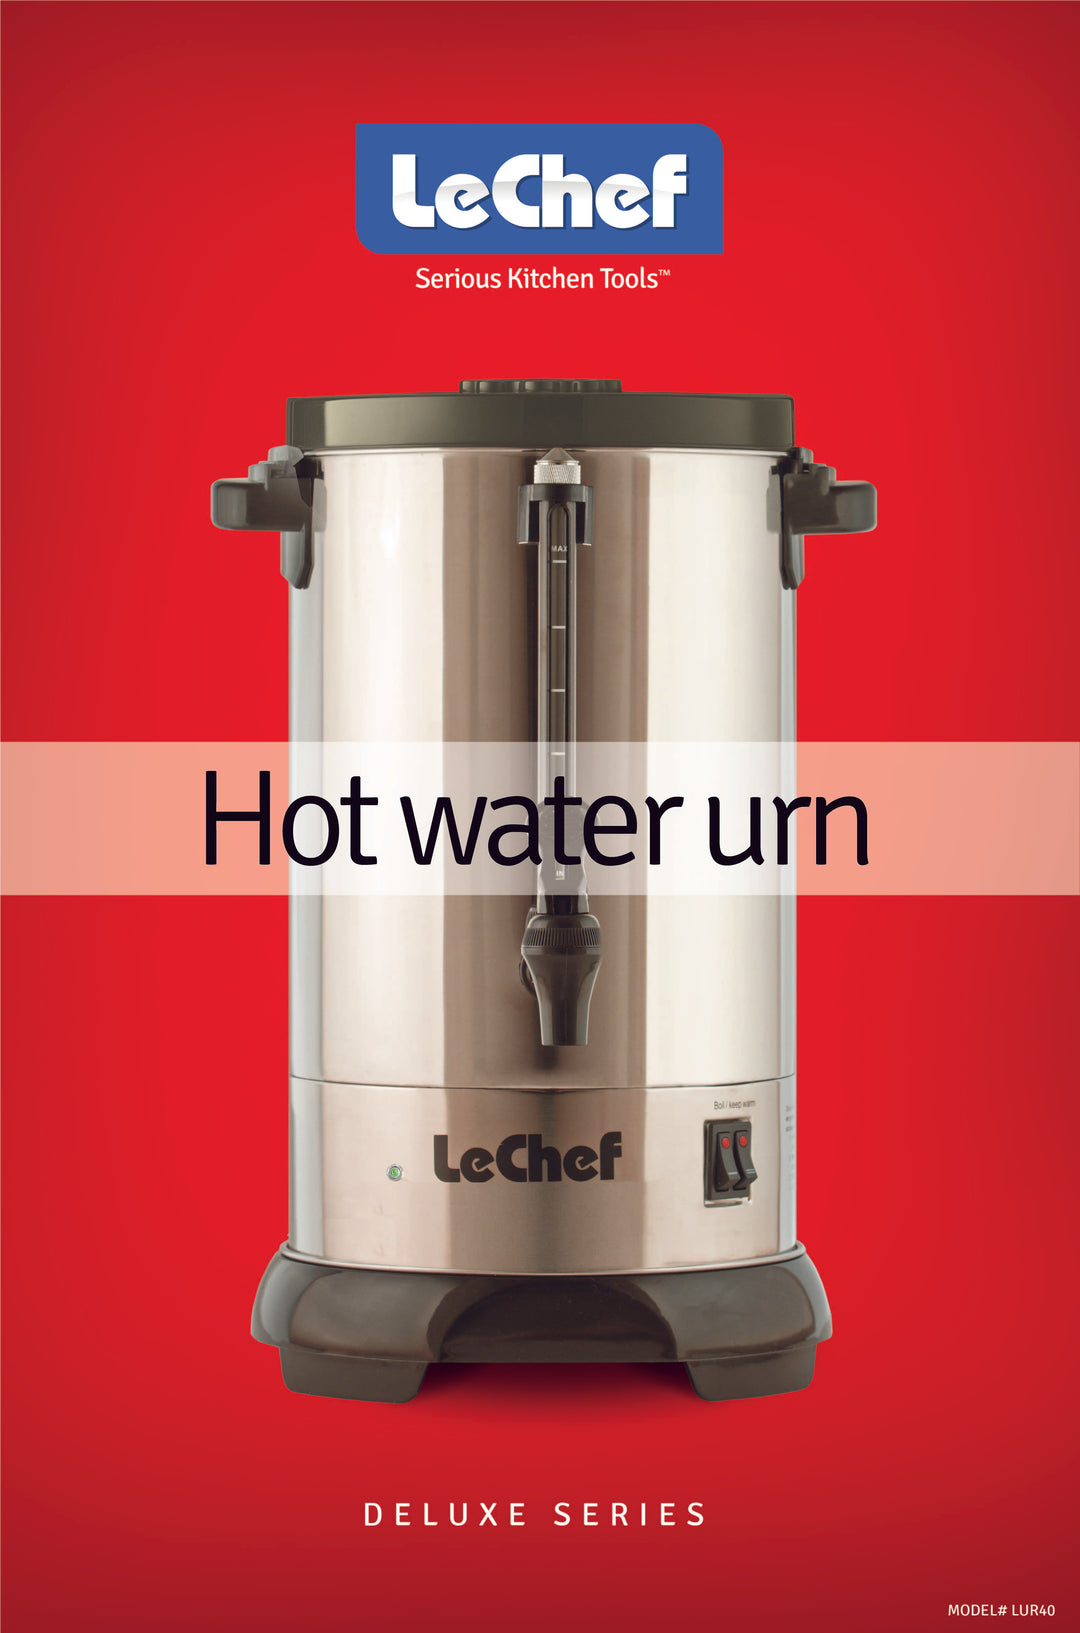 LE'CHEF ELECTRIC HOT WATER URN 40 CUP MODEL# LUR40